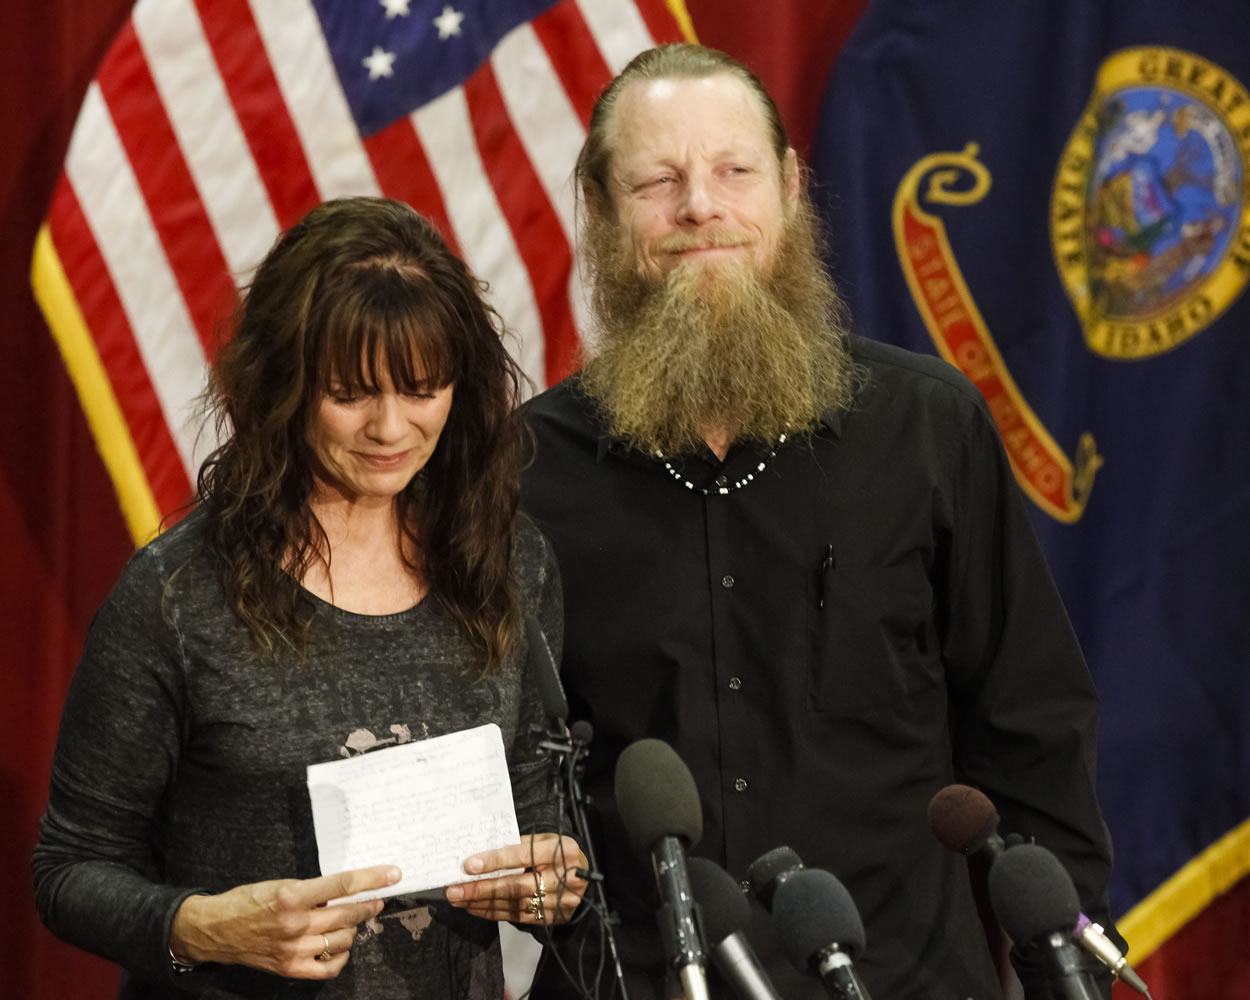 Jani and Bob Bergdahl speak to the media during a news conference at Gowen Field in Boise, Idaho, on Sunday regarding their son, Army Sgt.